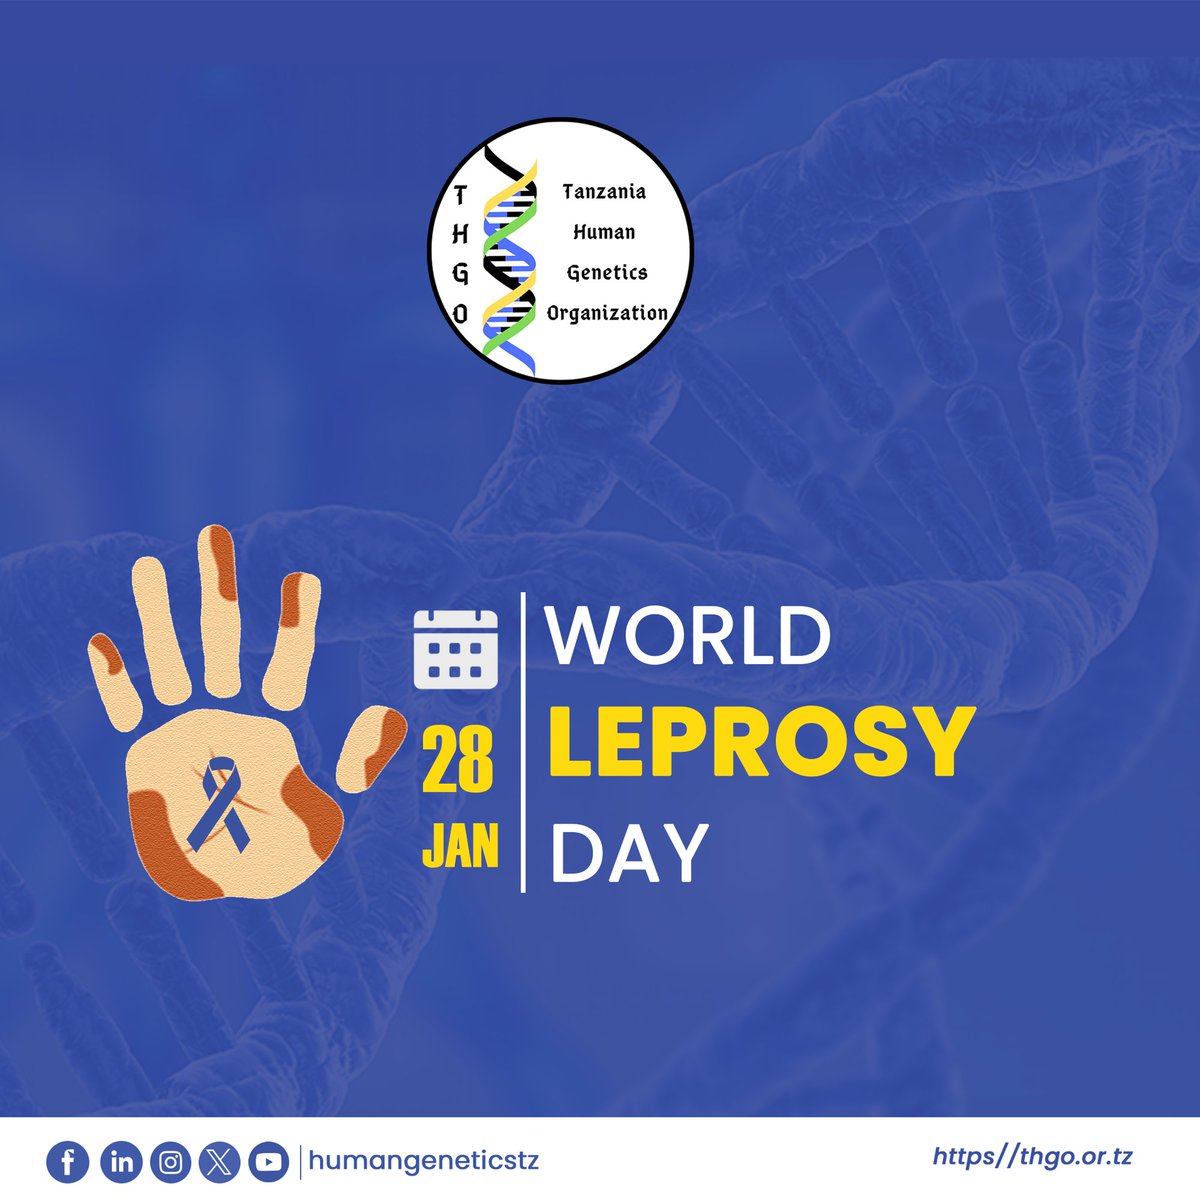 📢 Beat Leprosy! #WorldLeprosyDay

It is time to accelerate activities and redouble our efforts to work for a leprosy-free world 🌎

Join us today in spreading awareness, eliminating the stigma and advocating for the dignity of those affected by #leprosy

#WorldLeprosyDay